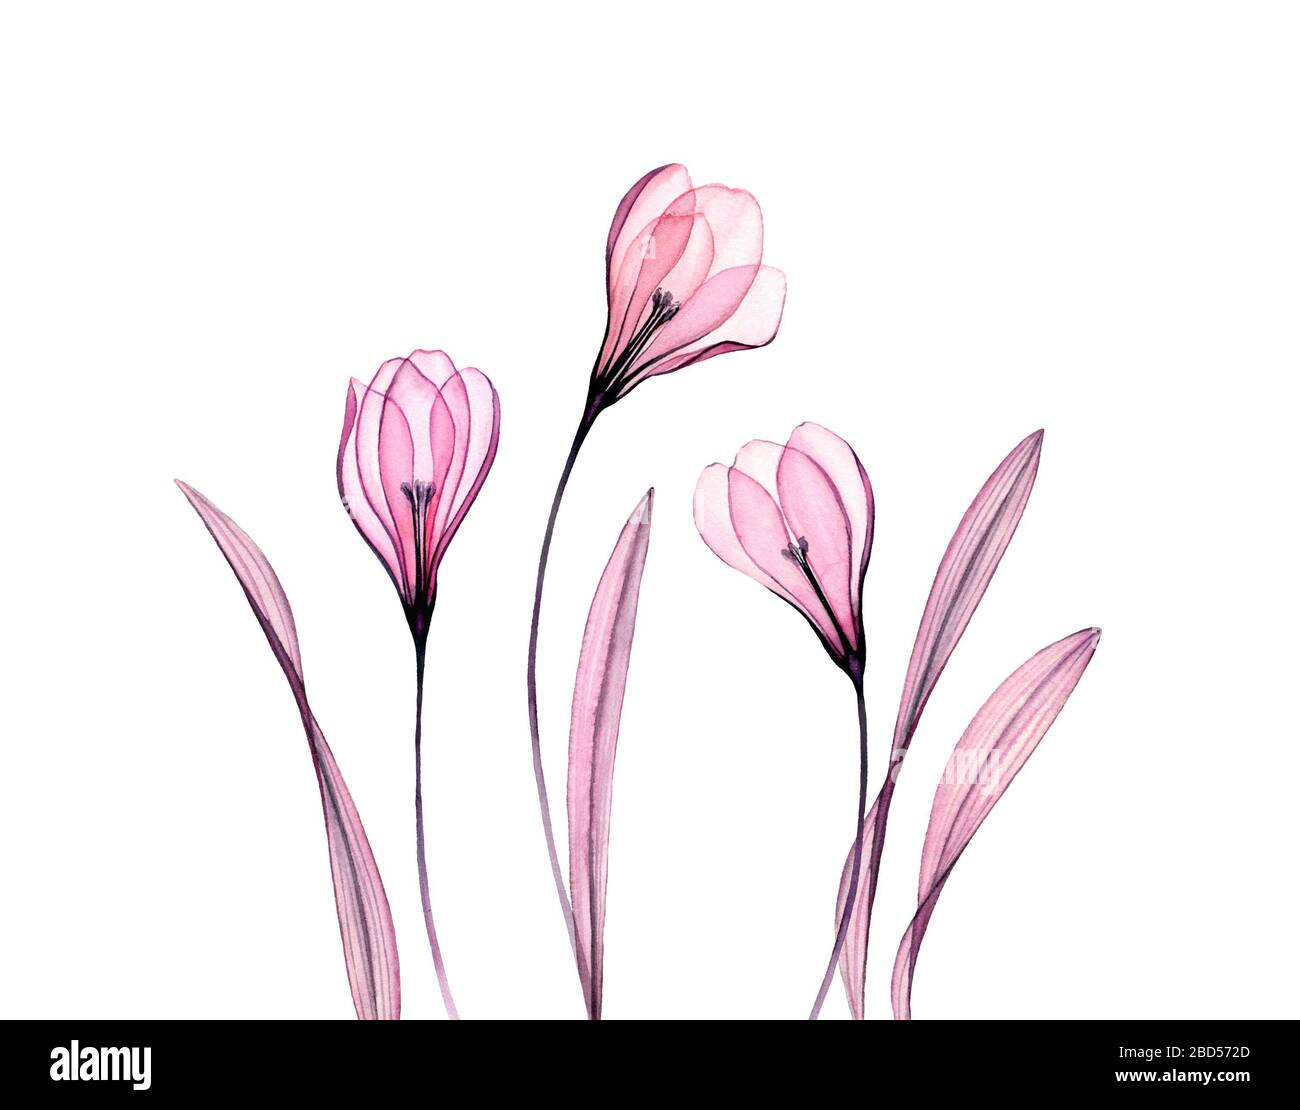 Watercolor Crocus flowers. Three plants isolated on white. Hand painted floral artwork with transparent flowers. Botanical illustration for cards Stock Photo